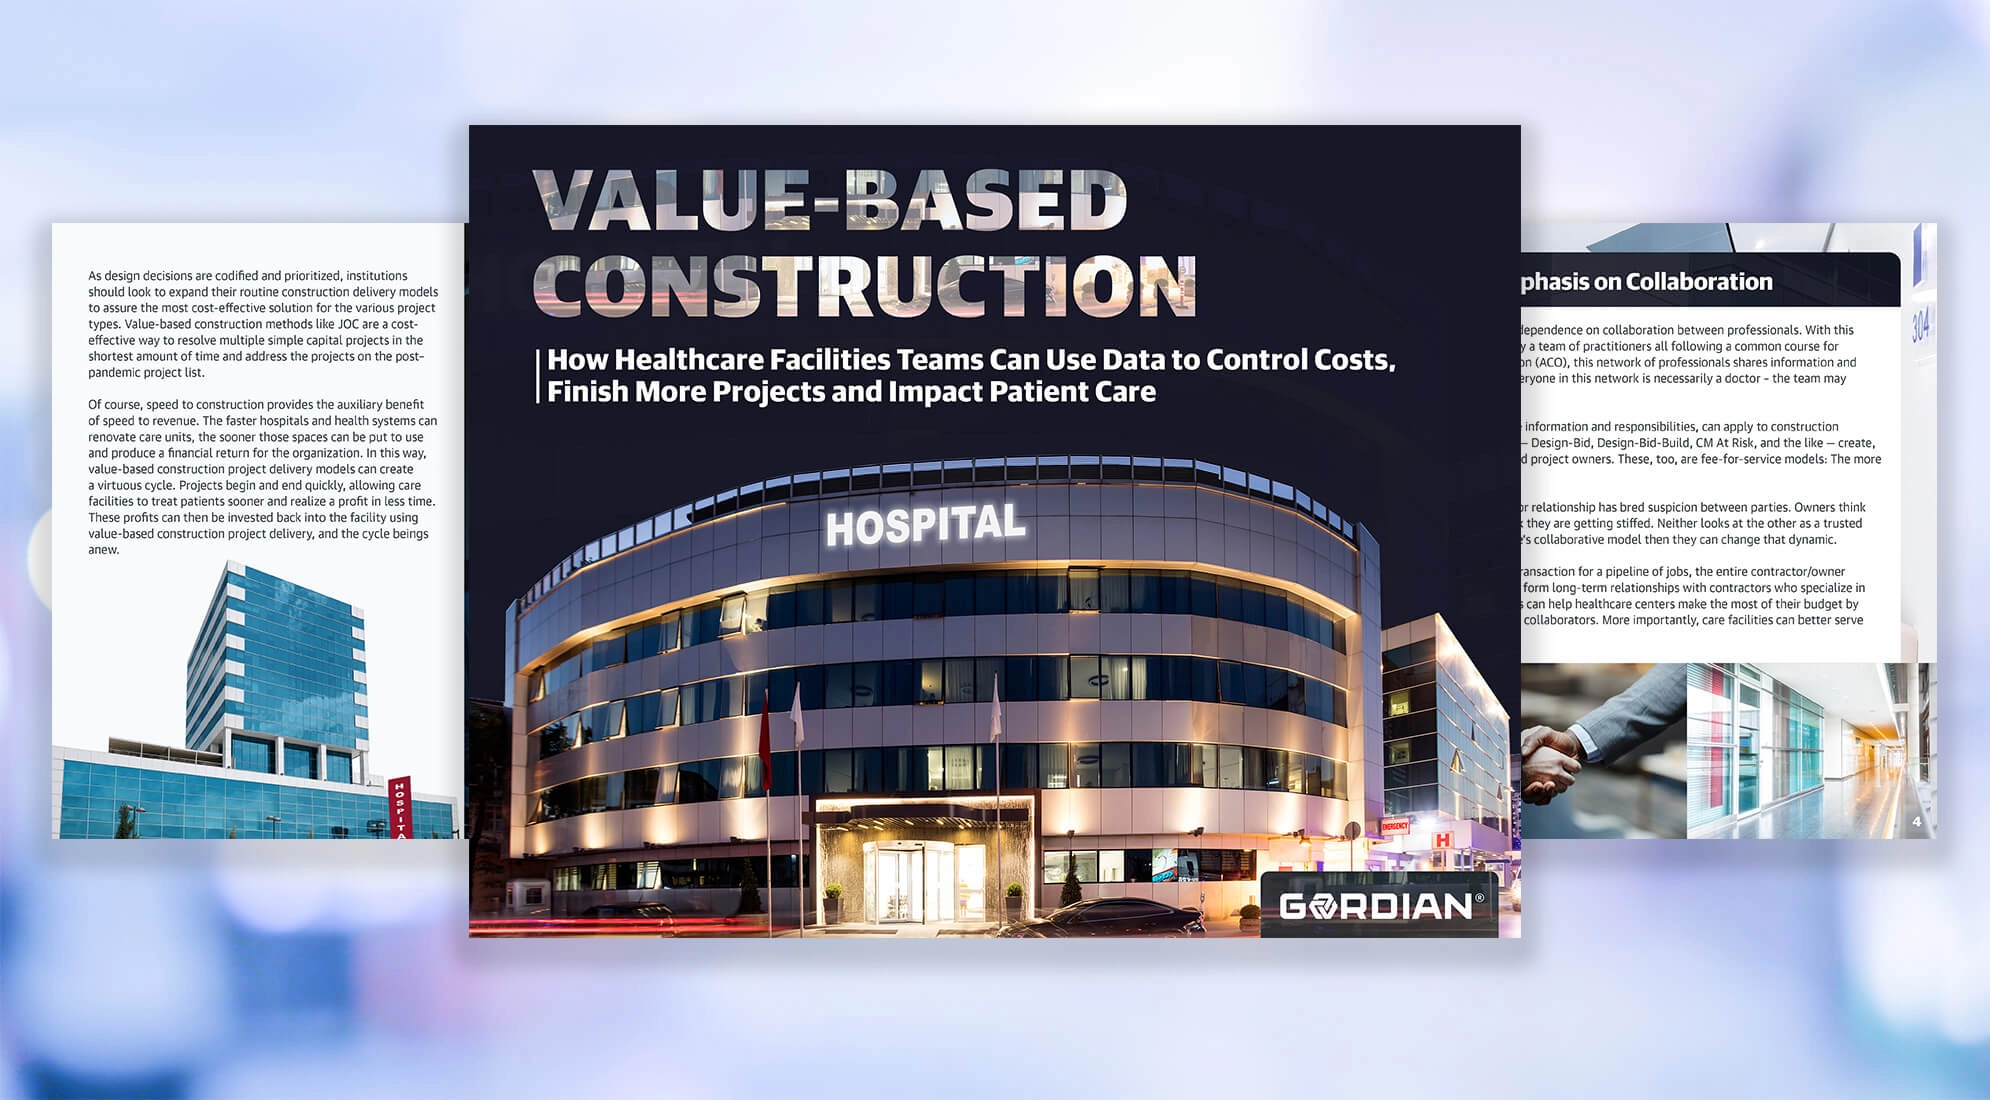 Value-based construction can help facilities teams maximize resources.